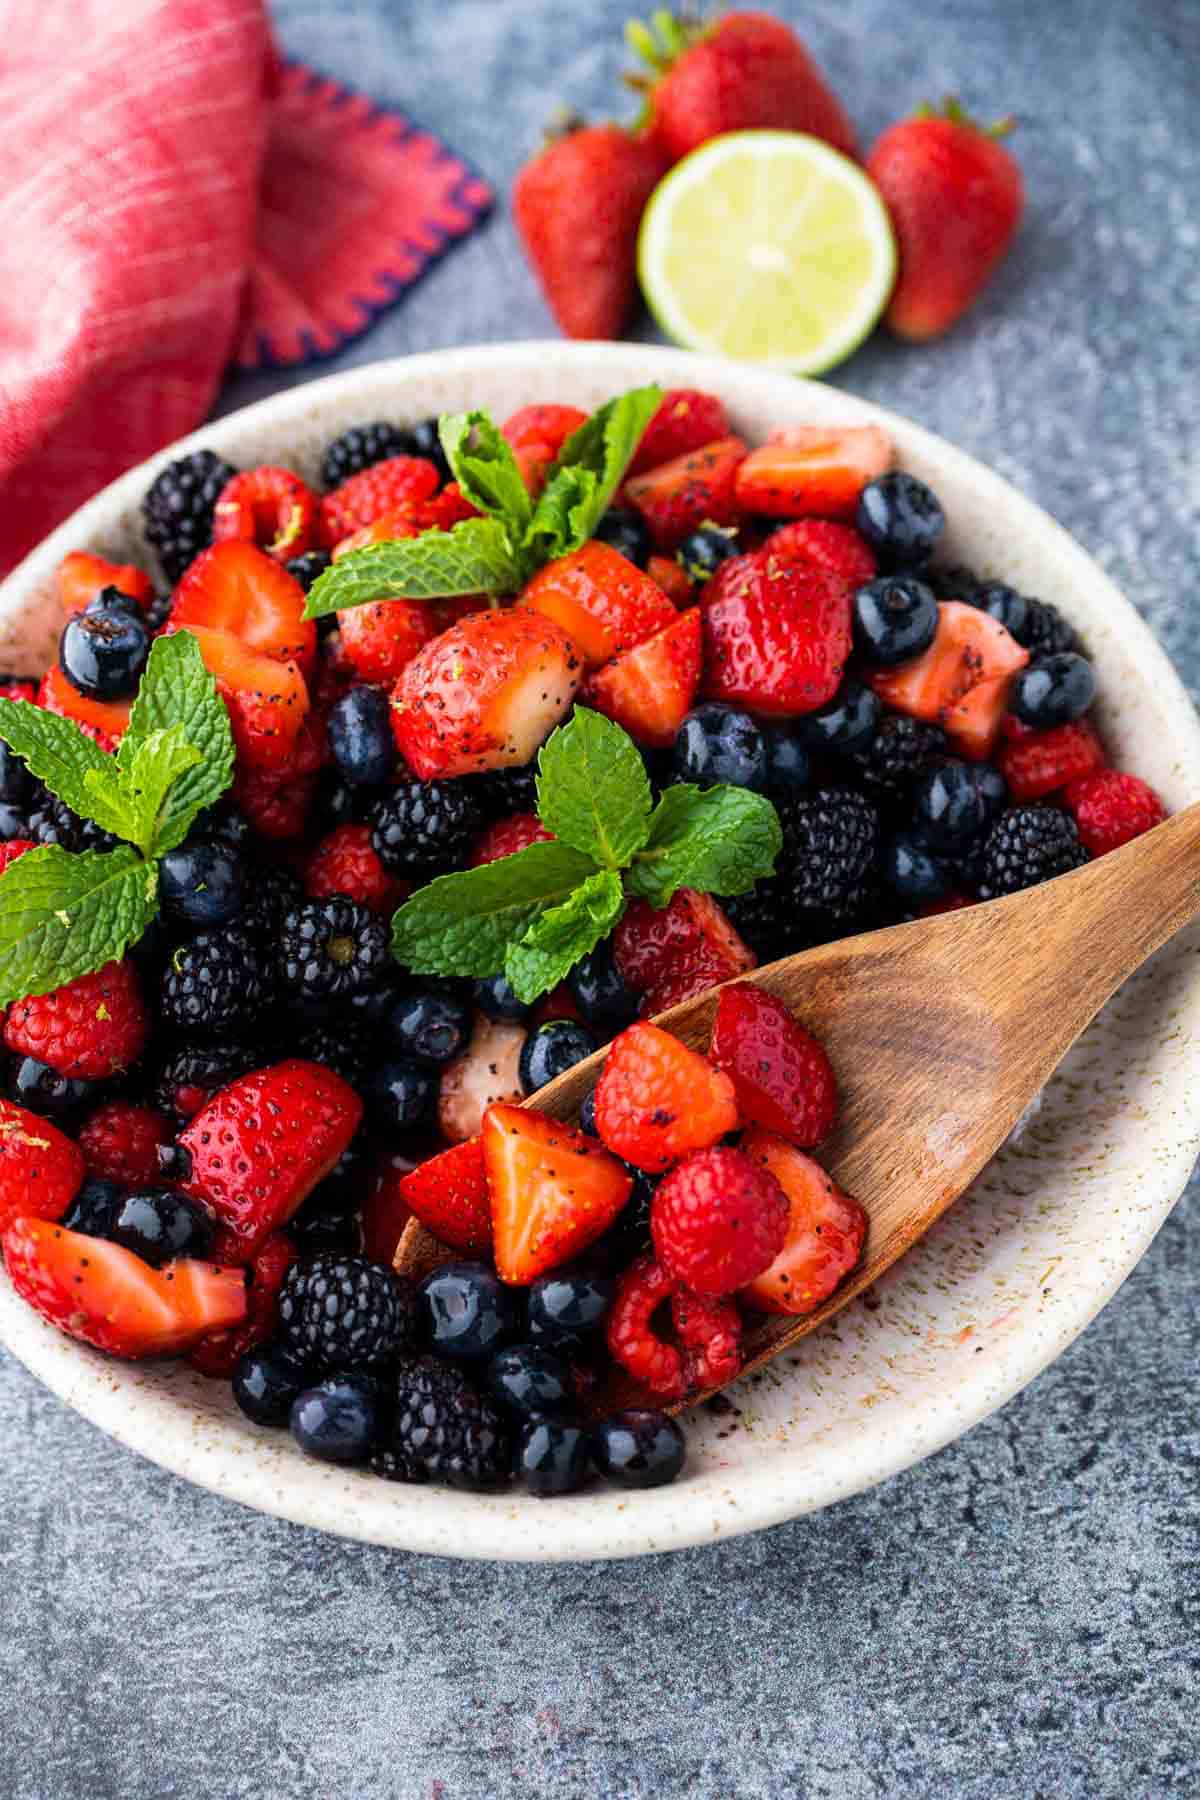 Summer Fruit Salad (With Honey Basil Dressing) - Meals with Maggie